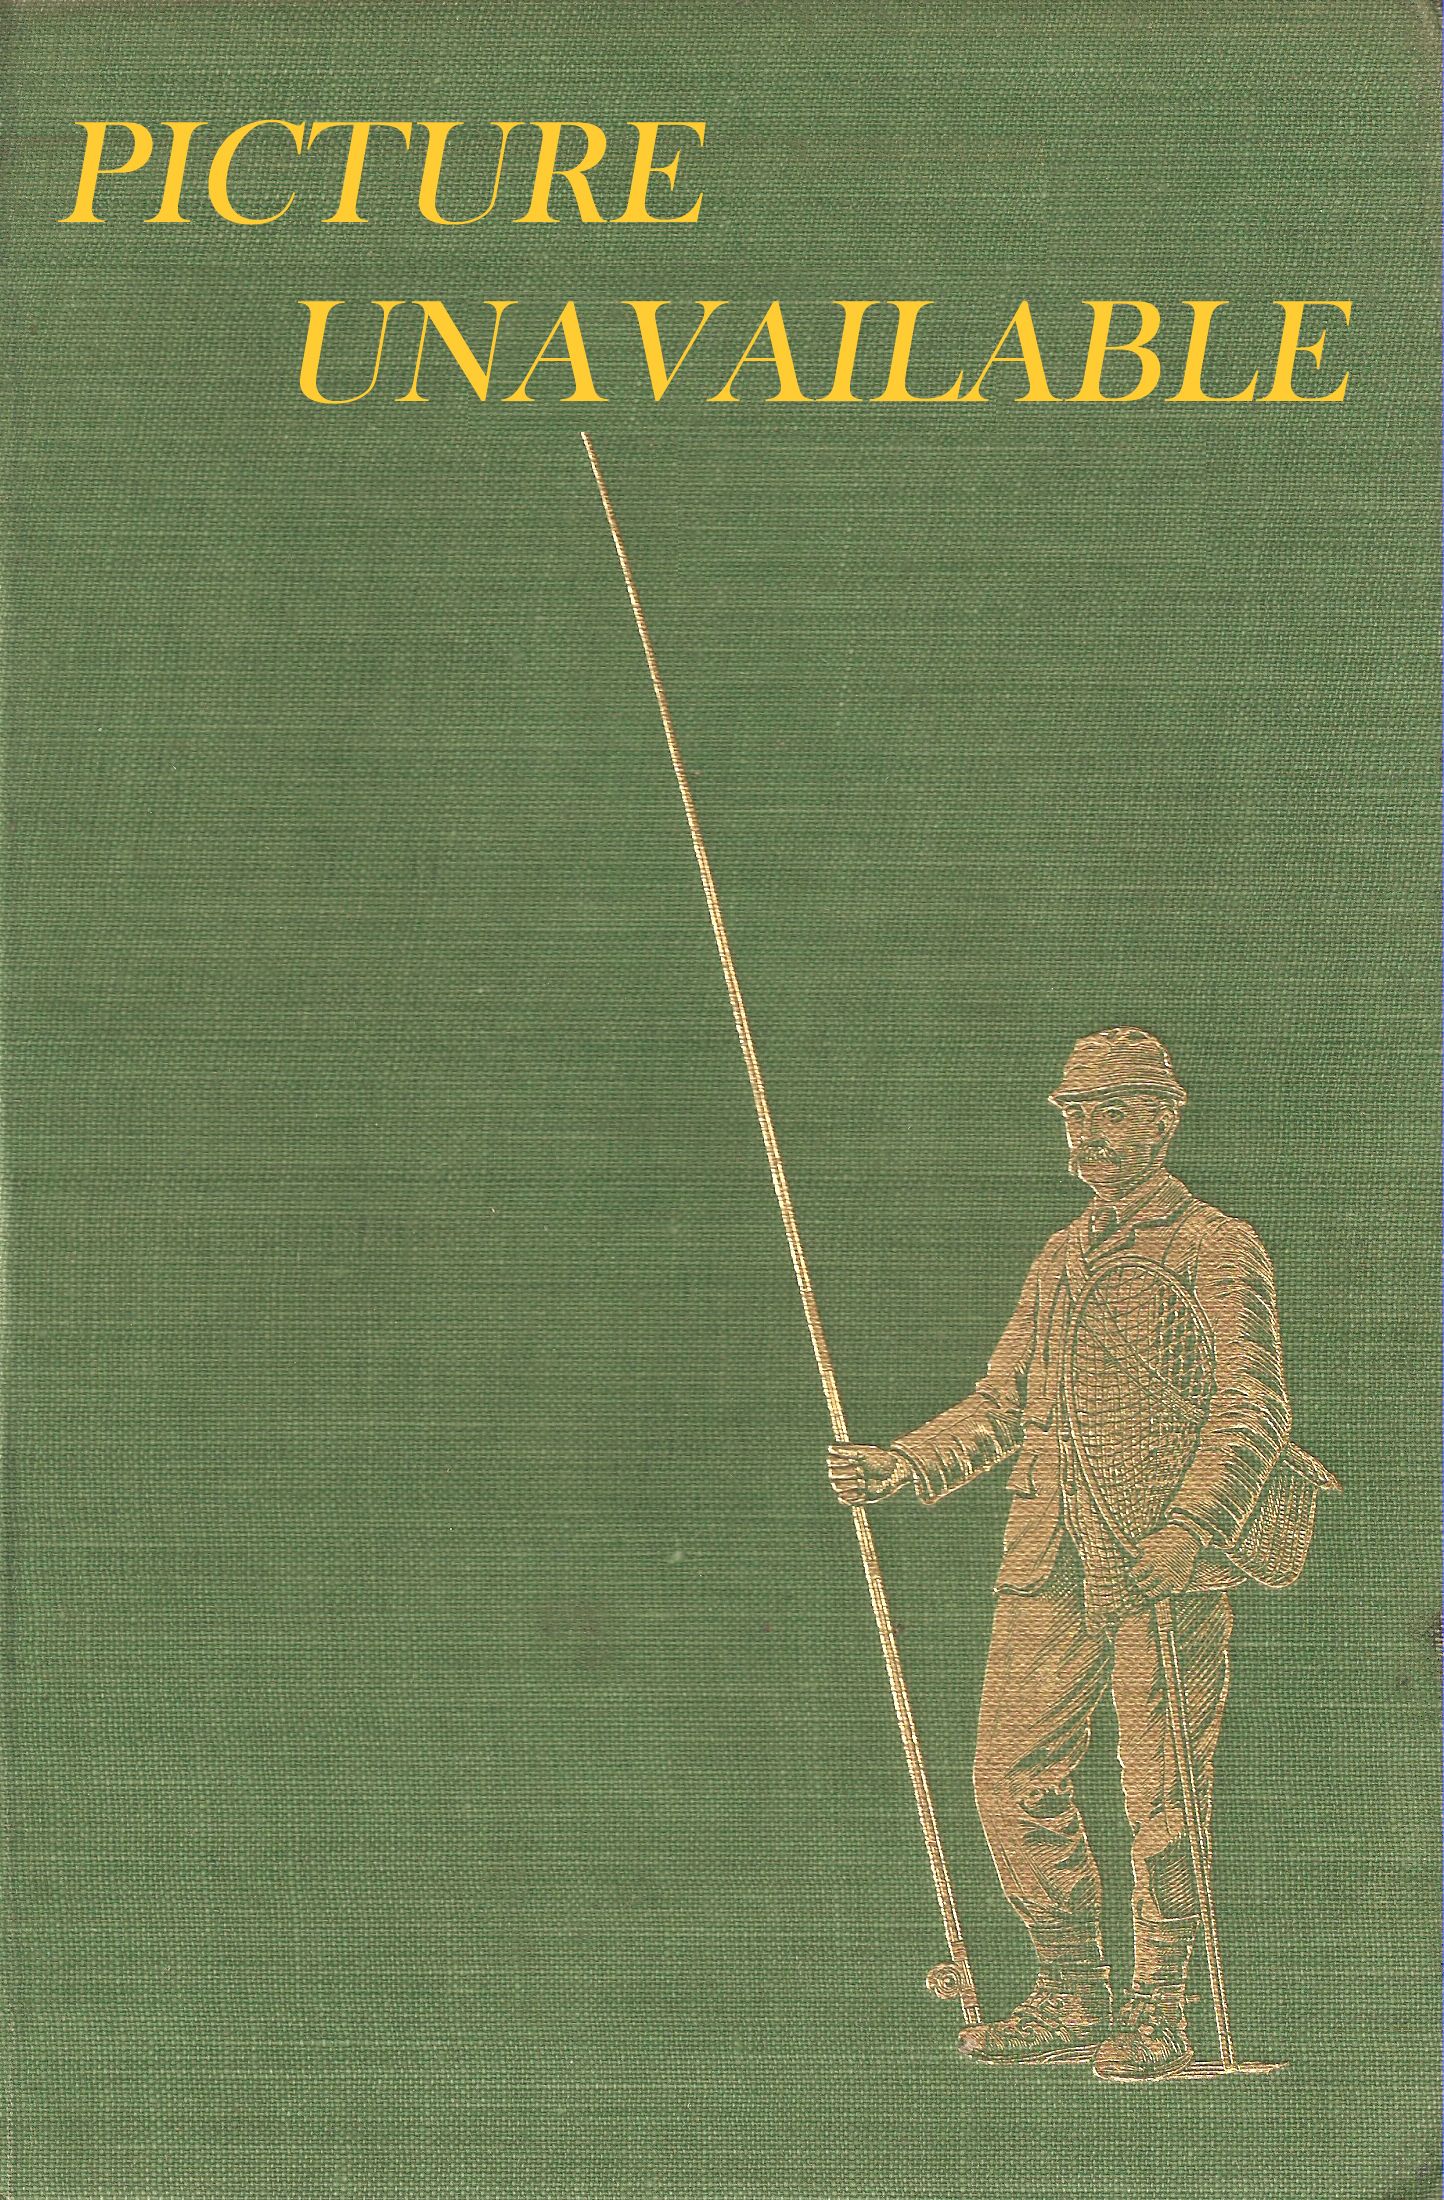 TROUT FLIES OF STILLWATER: THE NATURAL FLY, ITS MATCHING ARTIFICIAL AND  FISHING TECHNIQUE. By John Goddard. First edition.